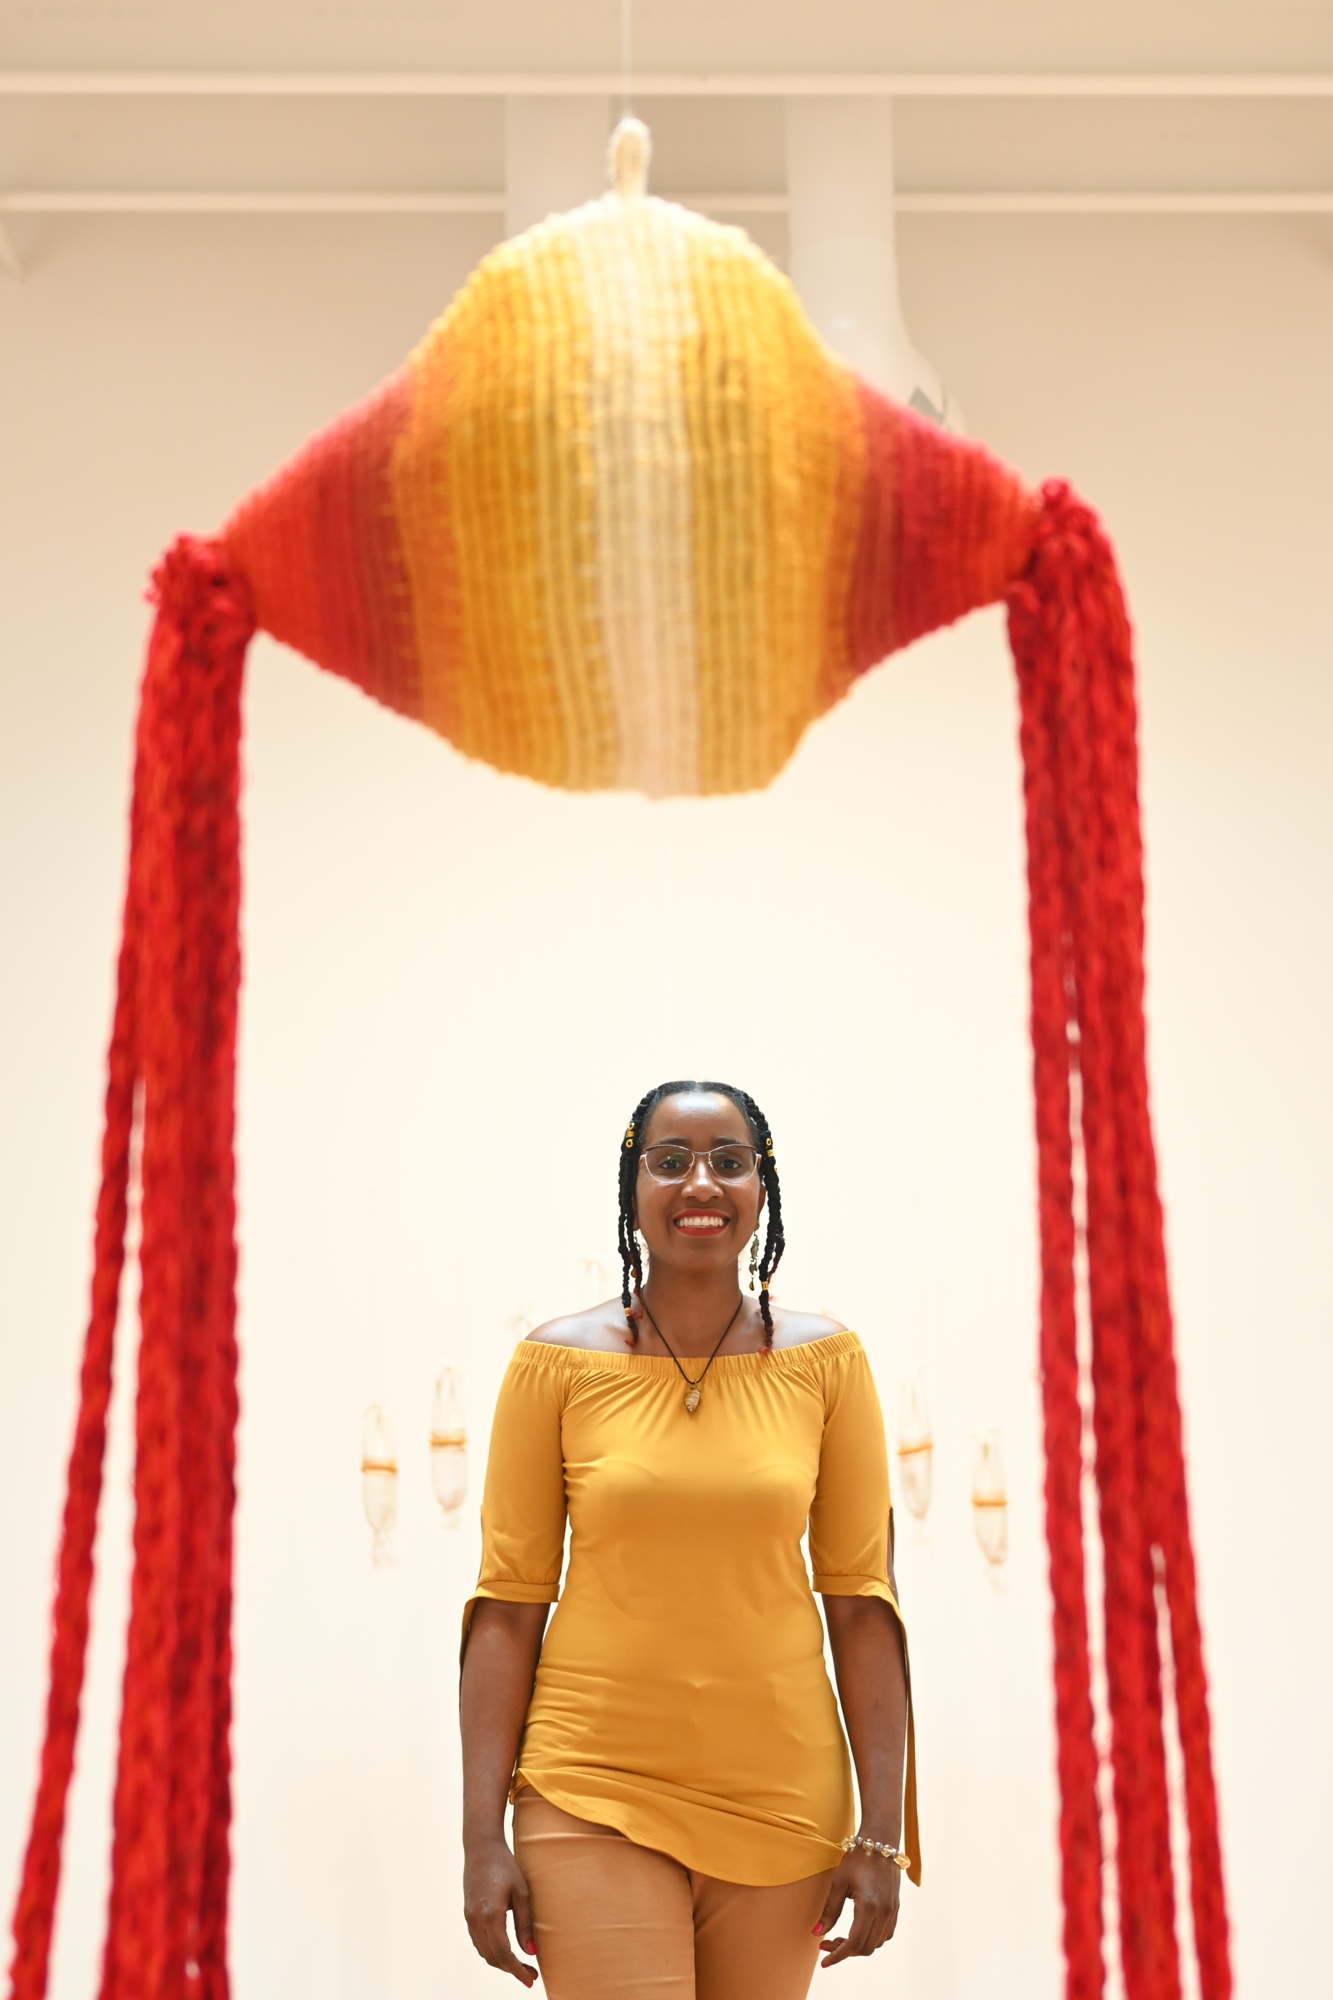 Fiber artist Katrina Coombs stands underneath one of her works at Sarasota Art Museum. (Photo by Spencer Fordin)